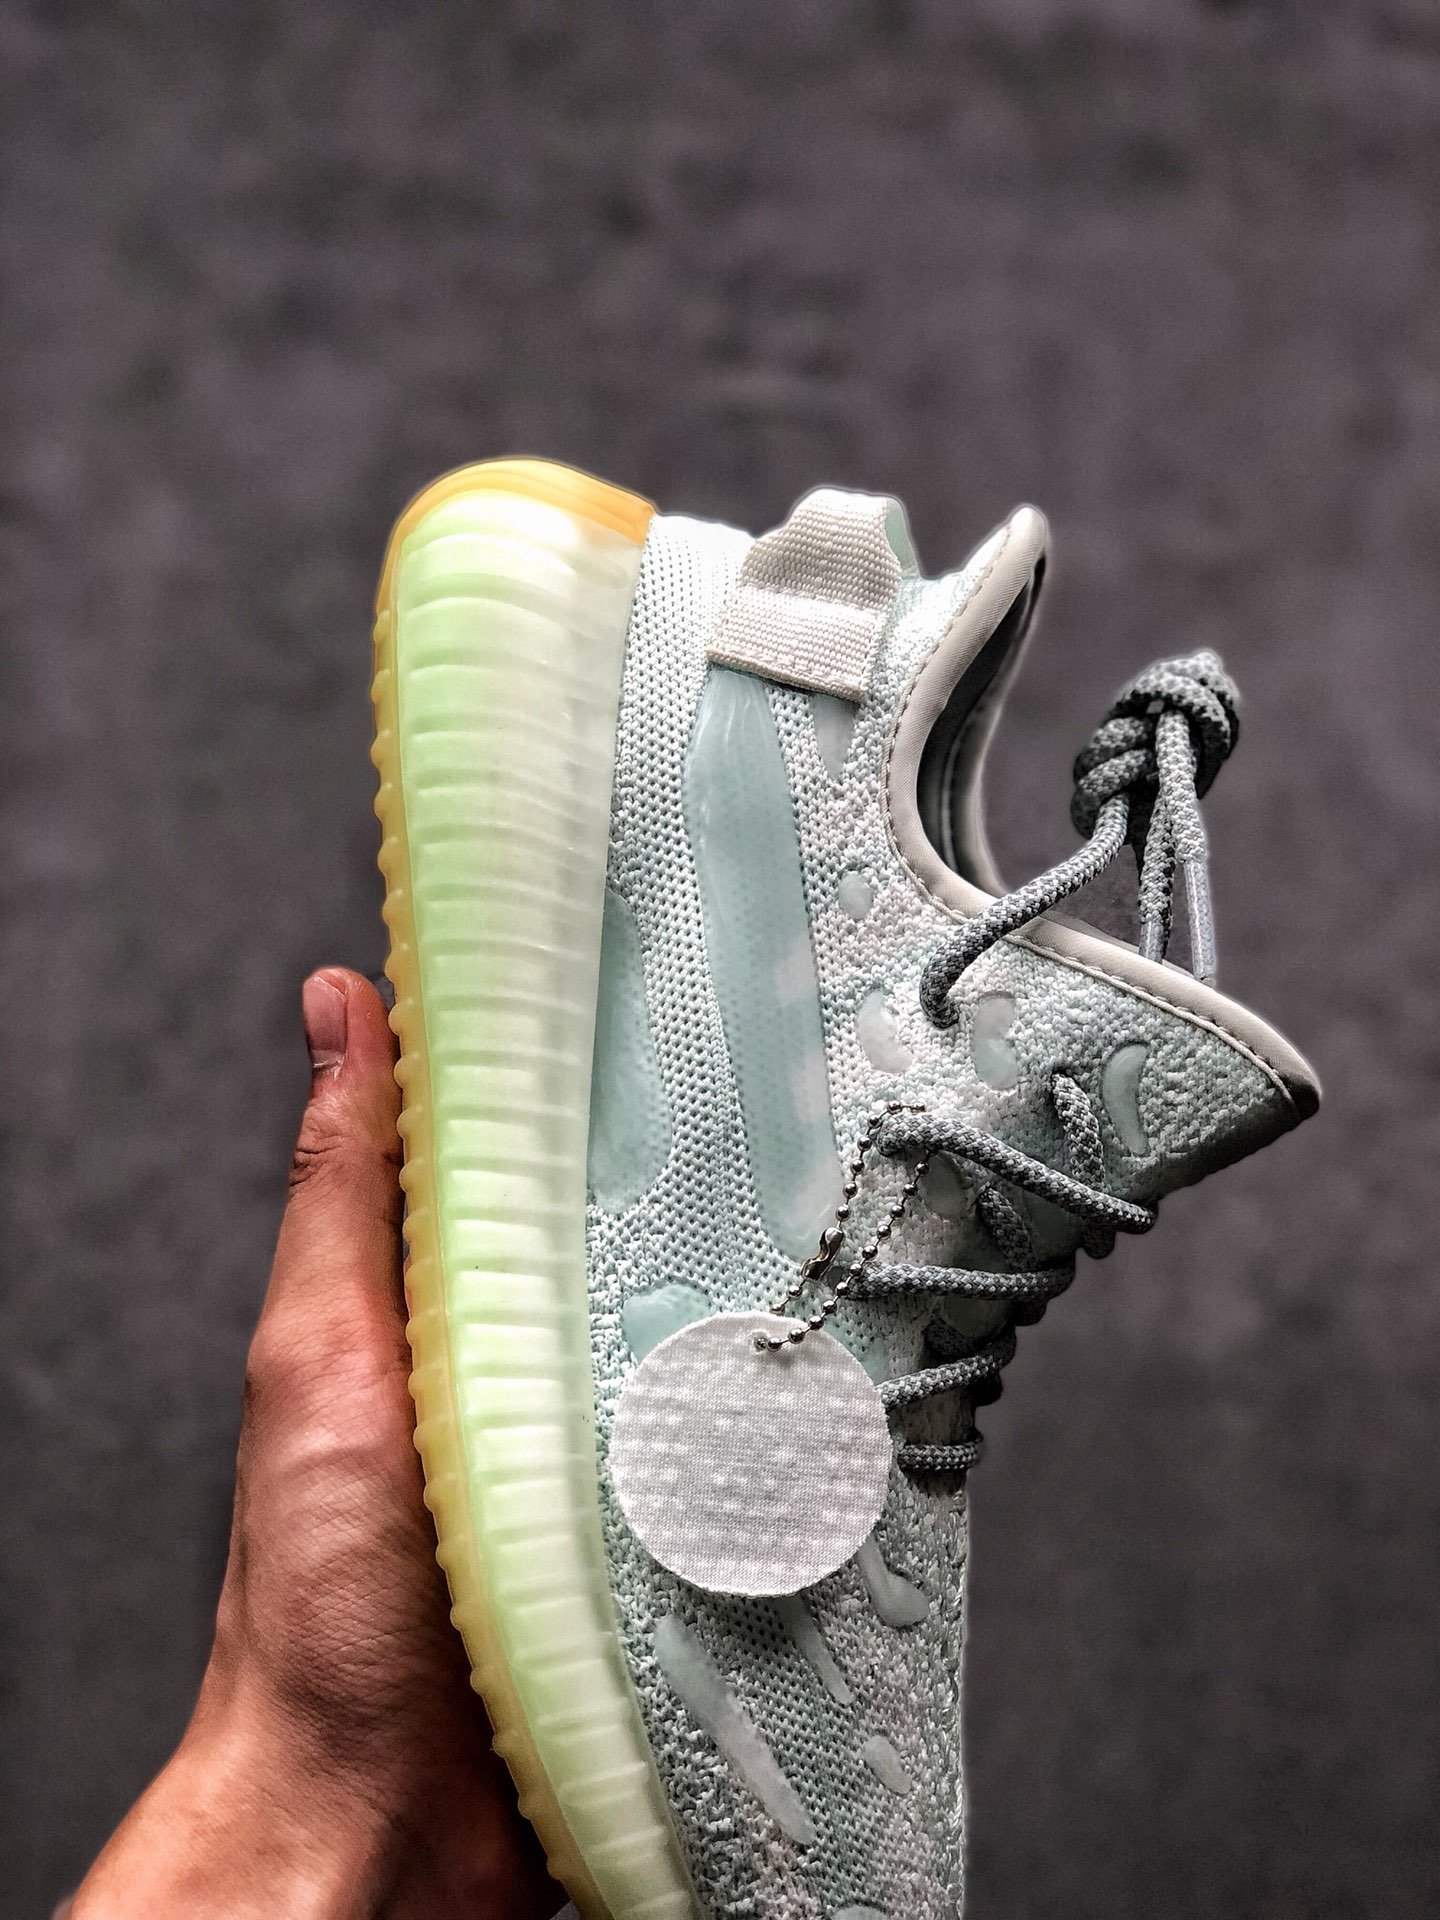 2020 cheap Adidas yeezy Boost 350 V2 Sneakers For Women # 225177, cheap Adidas Yeezy Shoes, only $99!